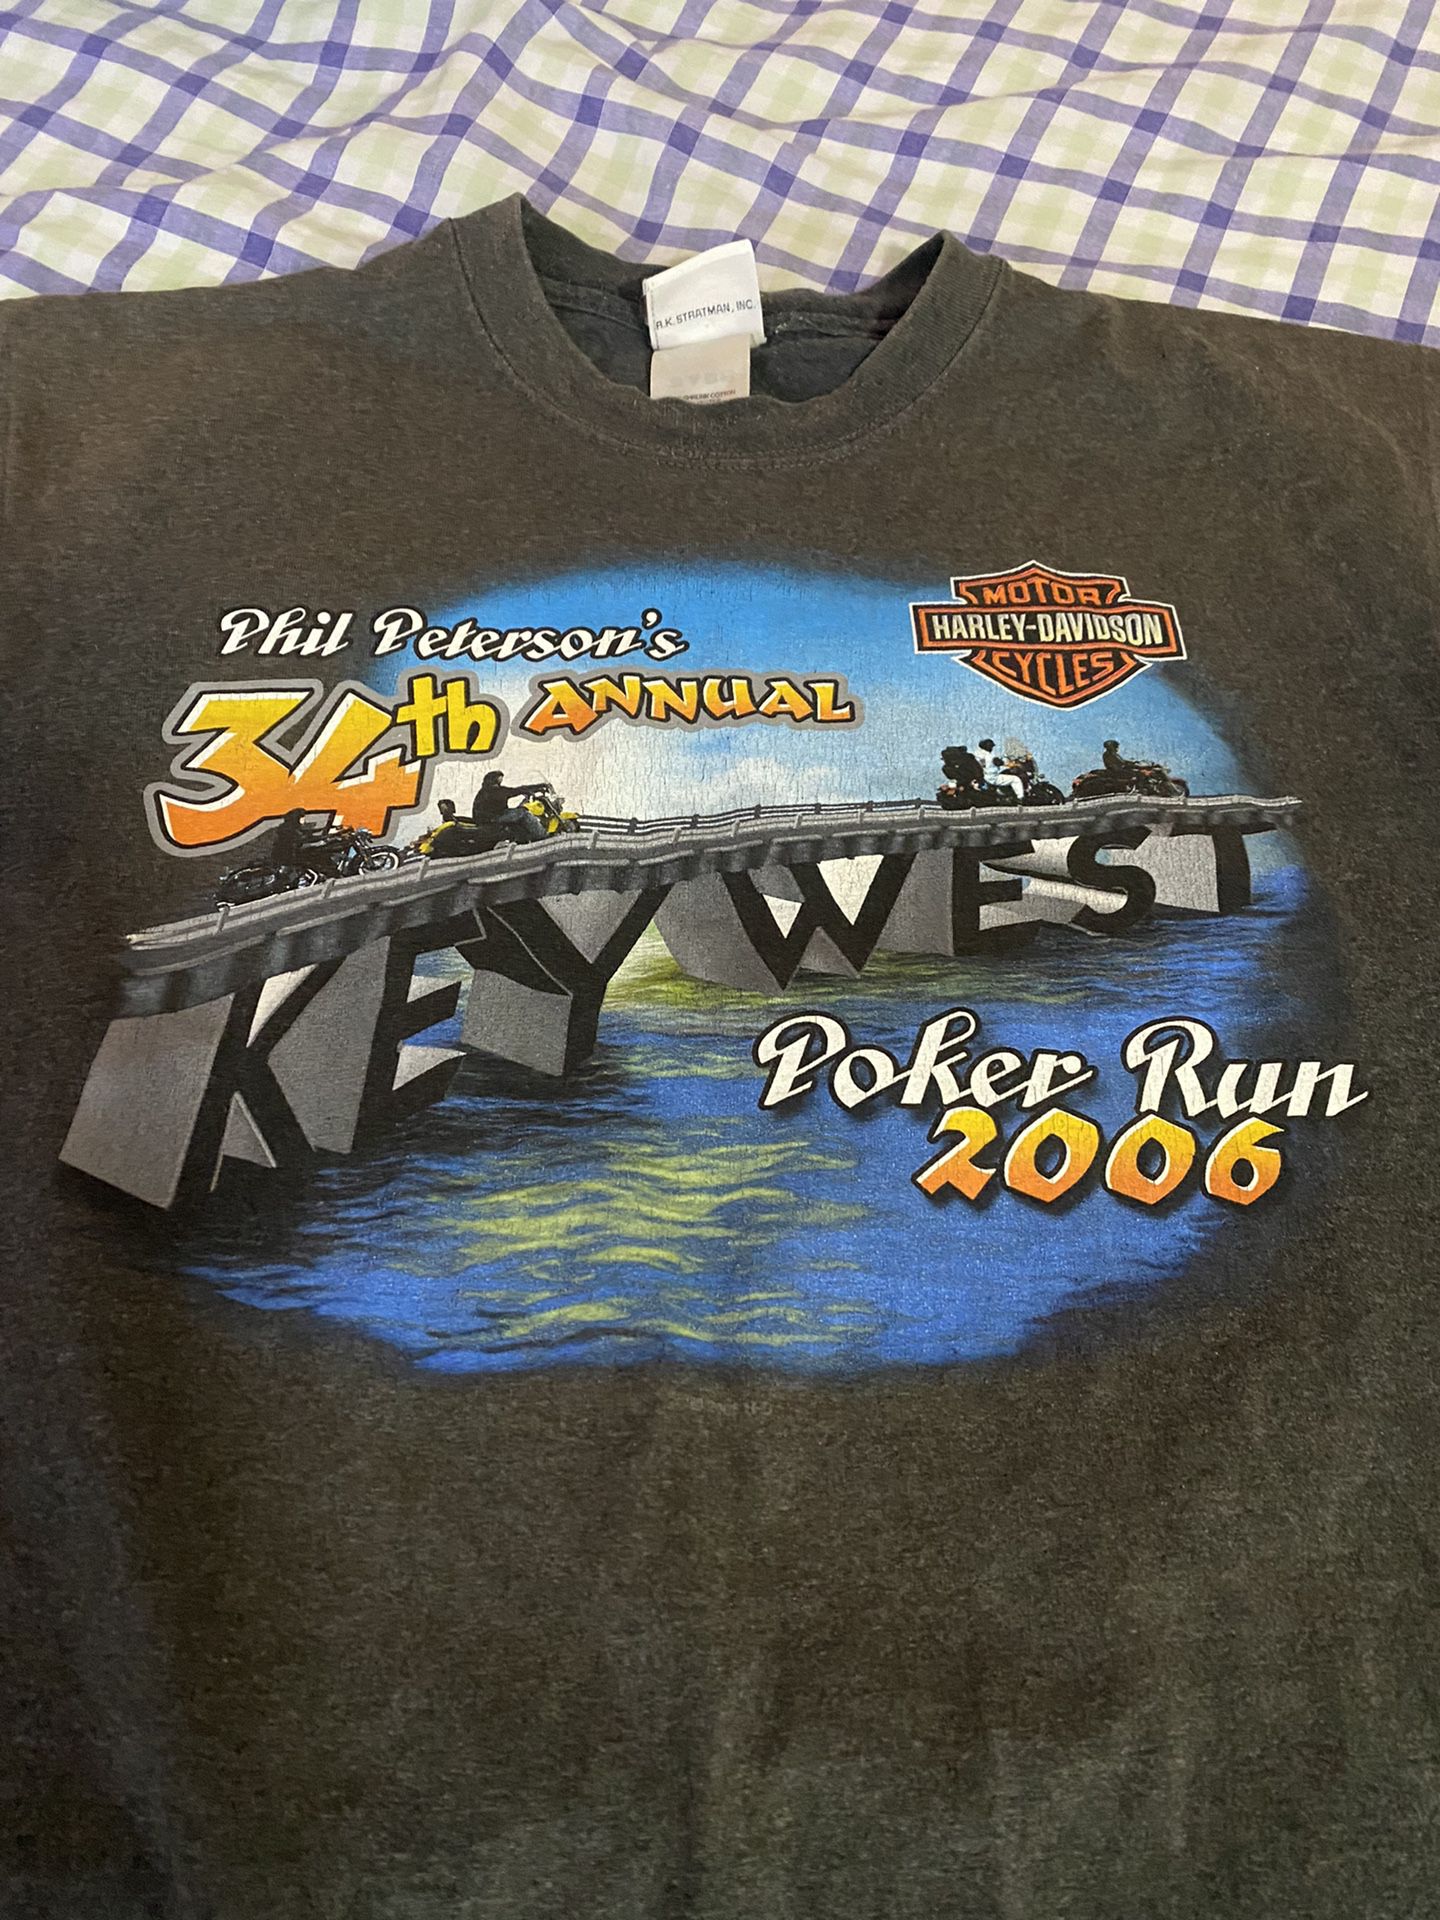 Harley Davidson Official Motorcycle Sleeveless Vintage Phil Peterson’s 34th Annual Key West Poker Run 2006 Rare Vintage Shirt Must Have  